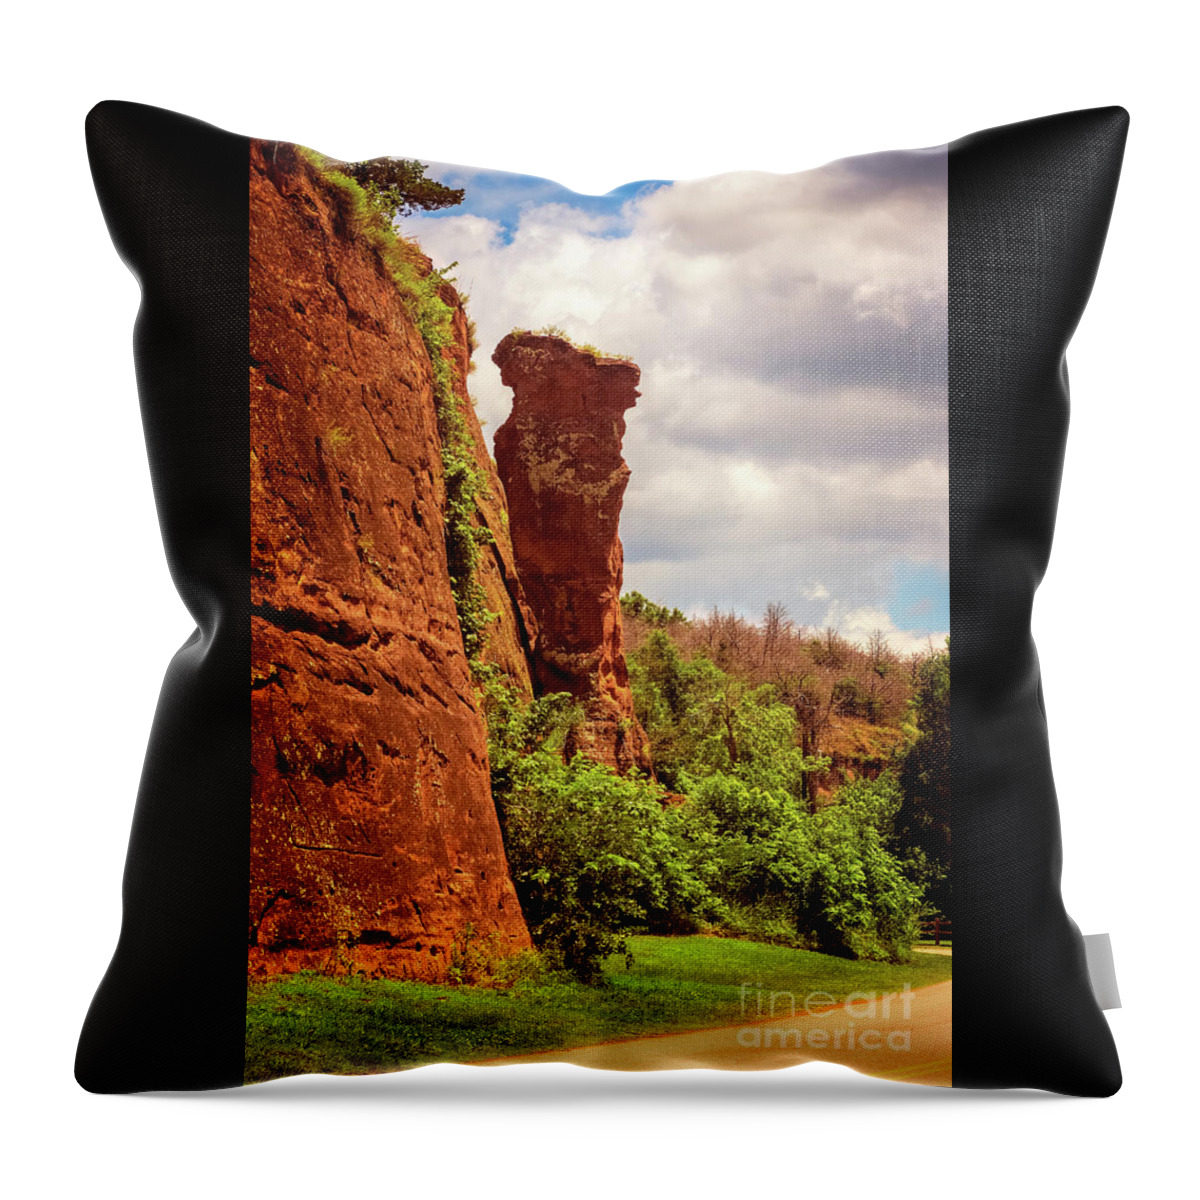 Balancing Rock Throw Pillow featuring the photograph Balancing Rock by Imagery by Charly